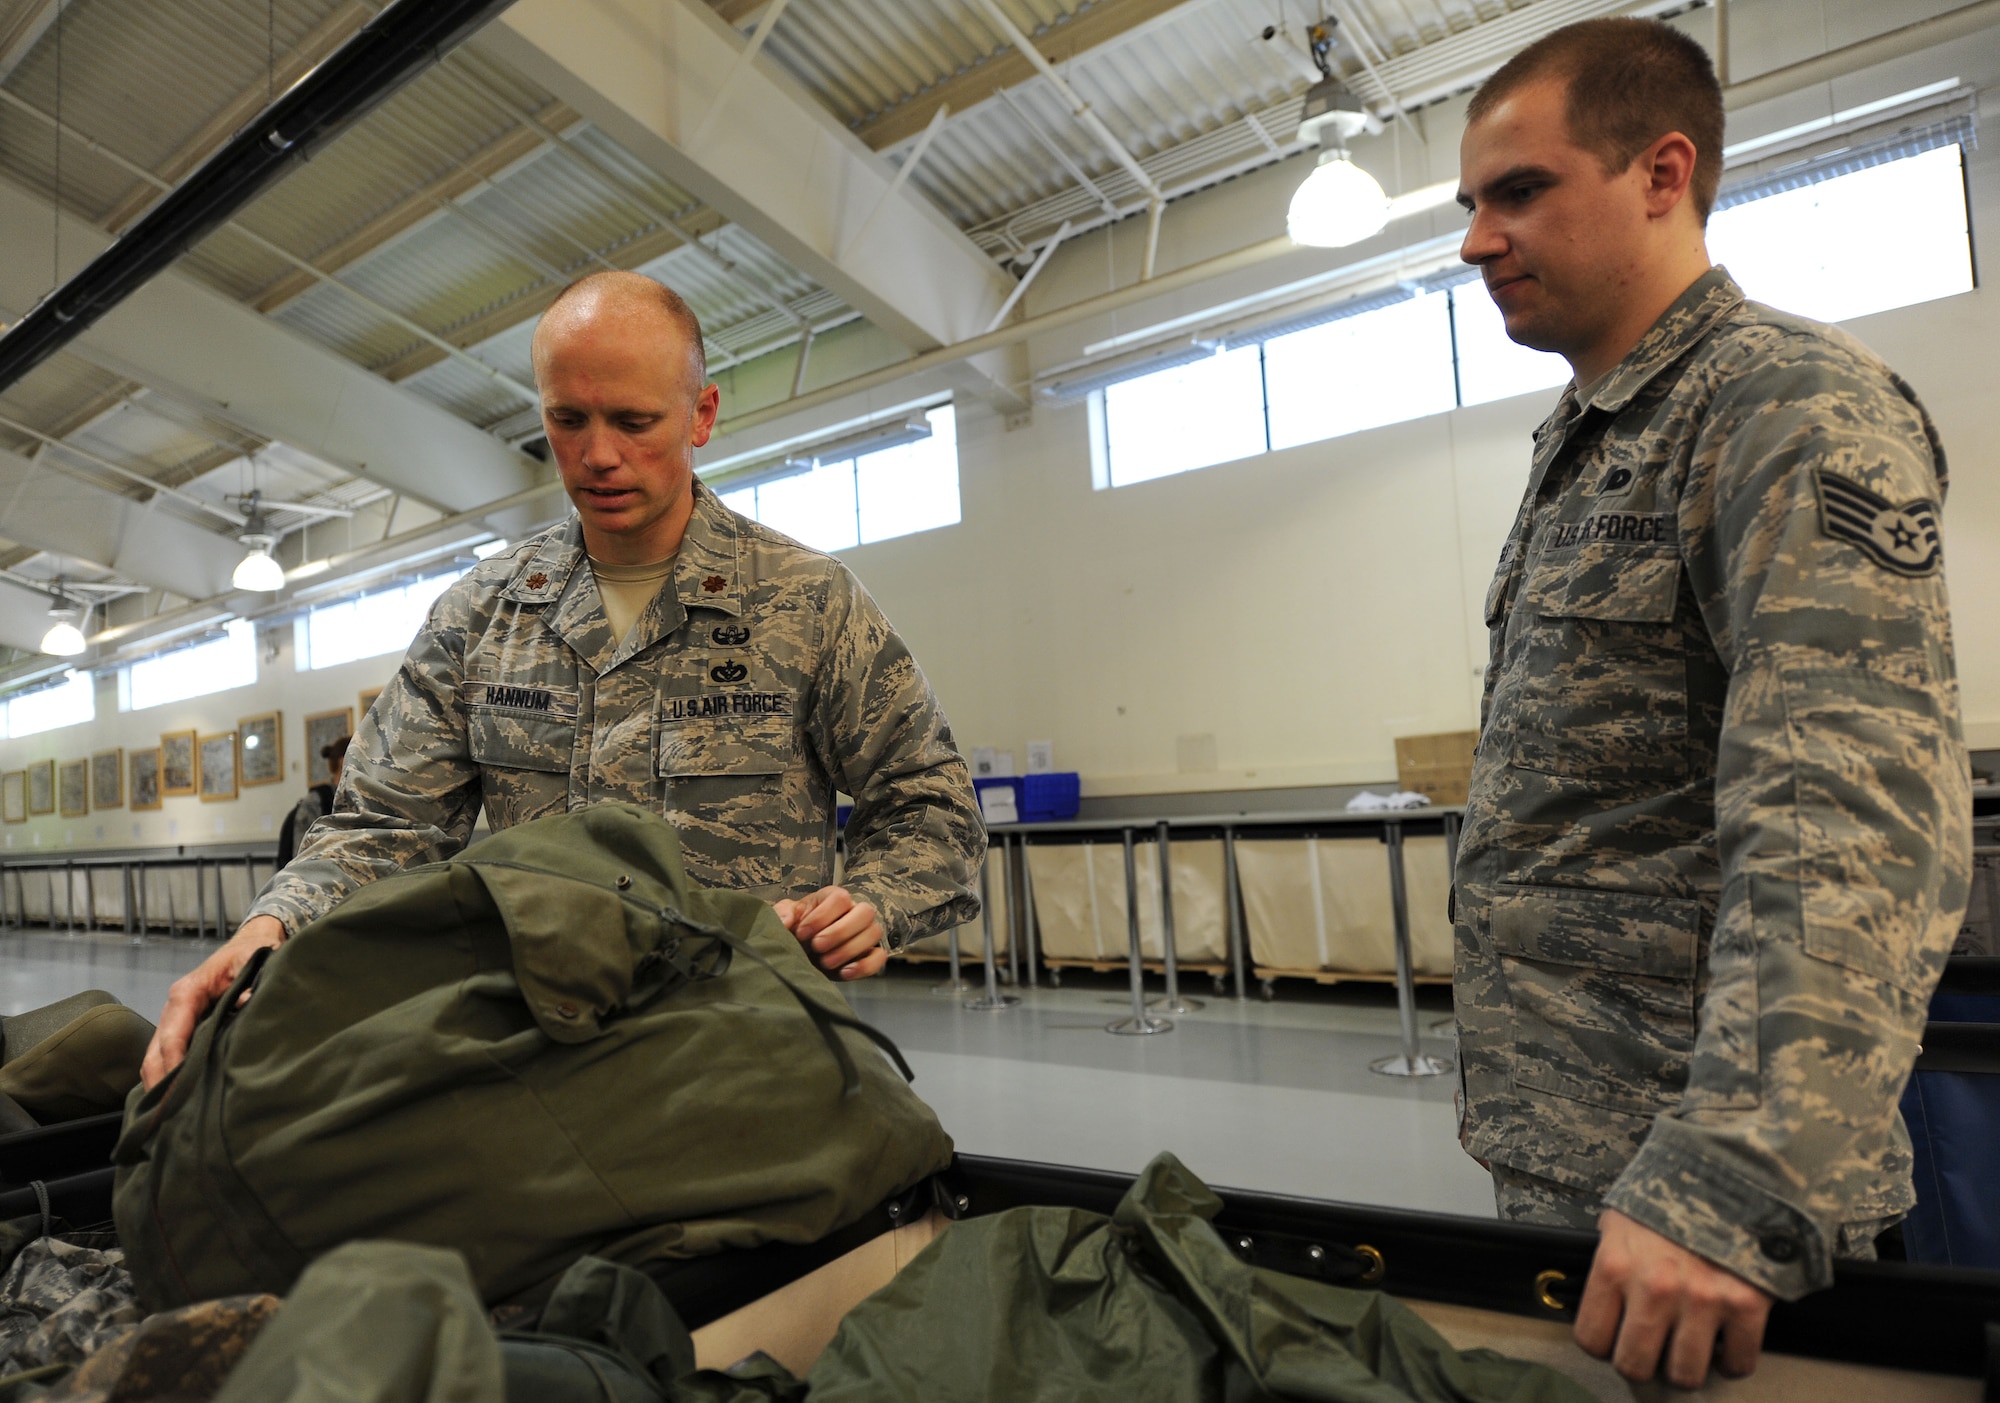 Maj. Kelly Hannum, 336th Training Support Squadron commander, builds an SV80 bag with Staff Sgt. Nicholas Waggle, 336th TRSS assistant NCO in charge of the warehouse, at Fairchild Air Force Base, Wash., July 9, 2013. Survival, evasion, resistance and escape students are given the SV80 bag which contains all the gear they will need for the woods such as bolt knives, aircrew vests, signal mirror, iodine, map, canteens, ponchos and more. (U.S. Air Force photo by Airman 1st Class Janelle Patiño/Released)